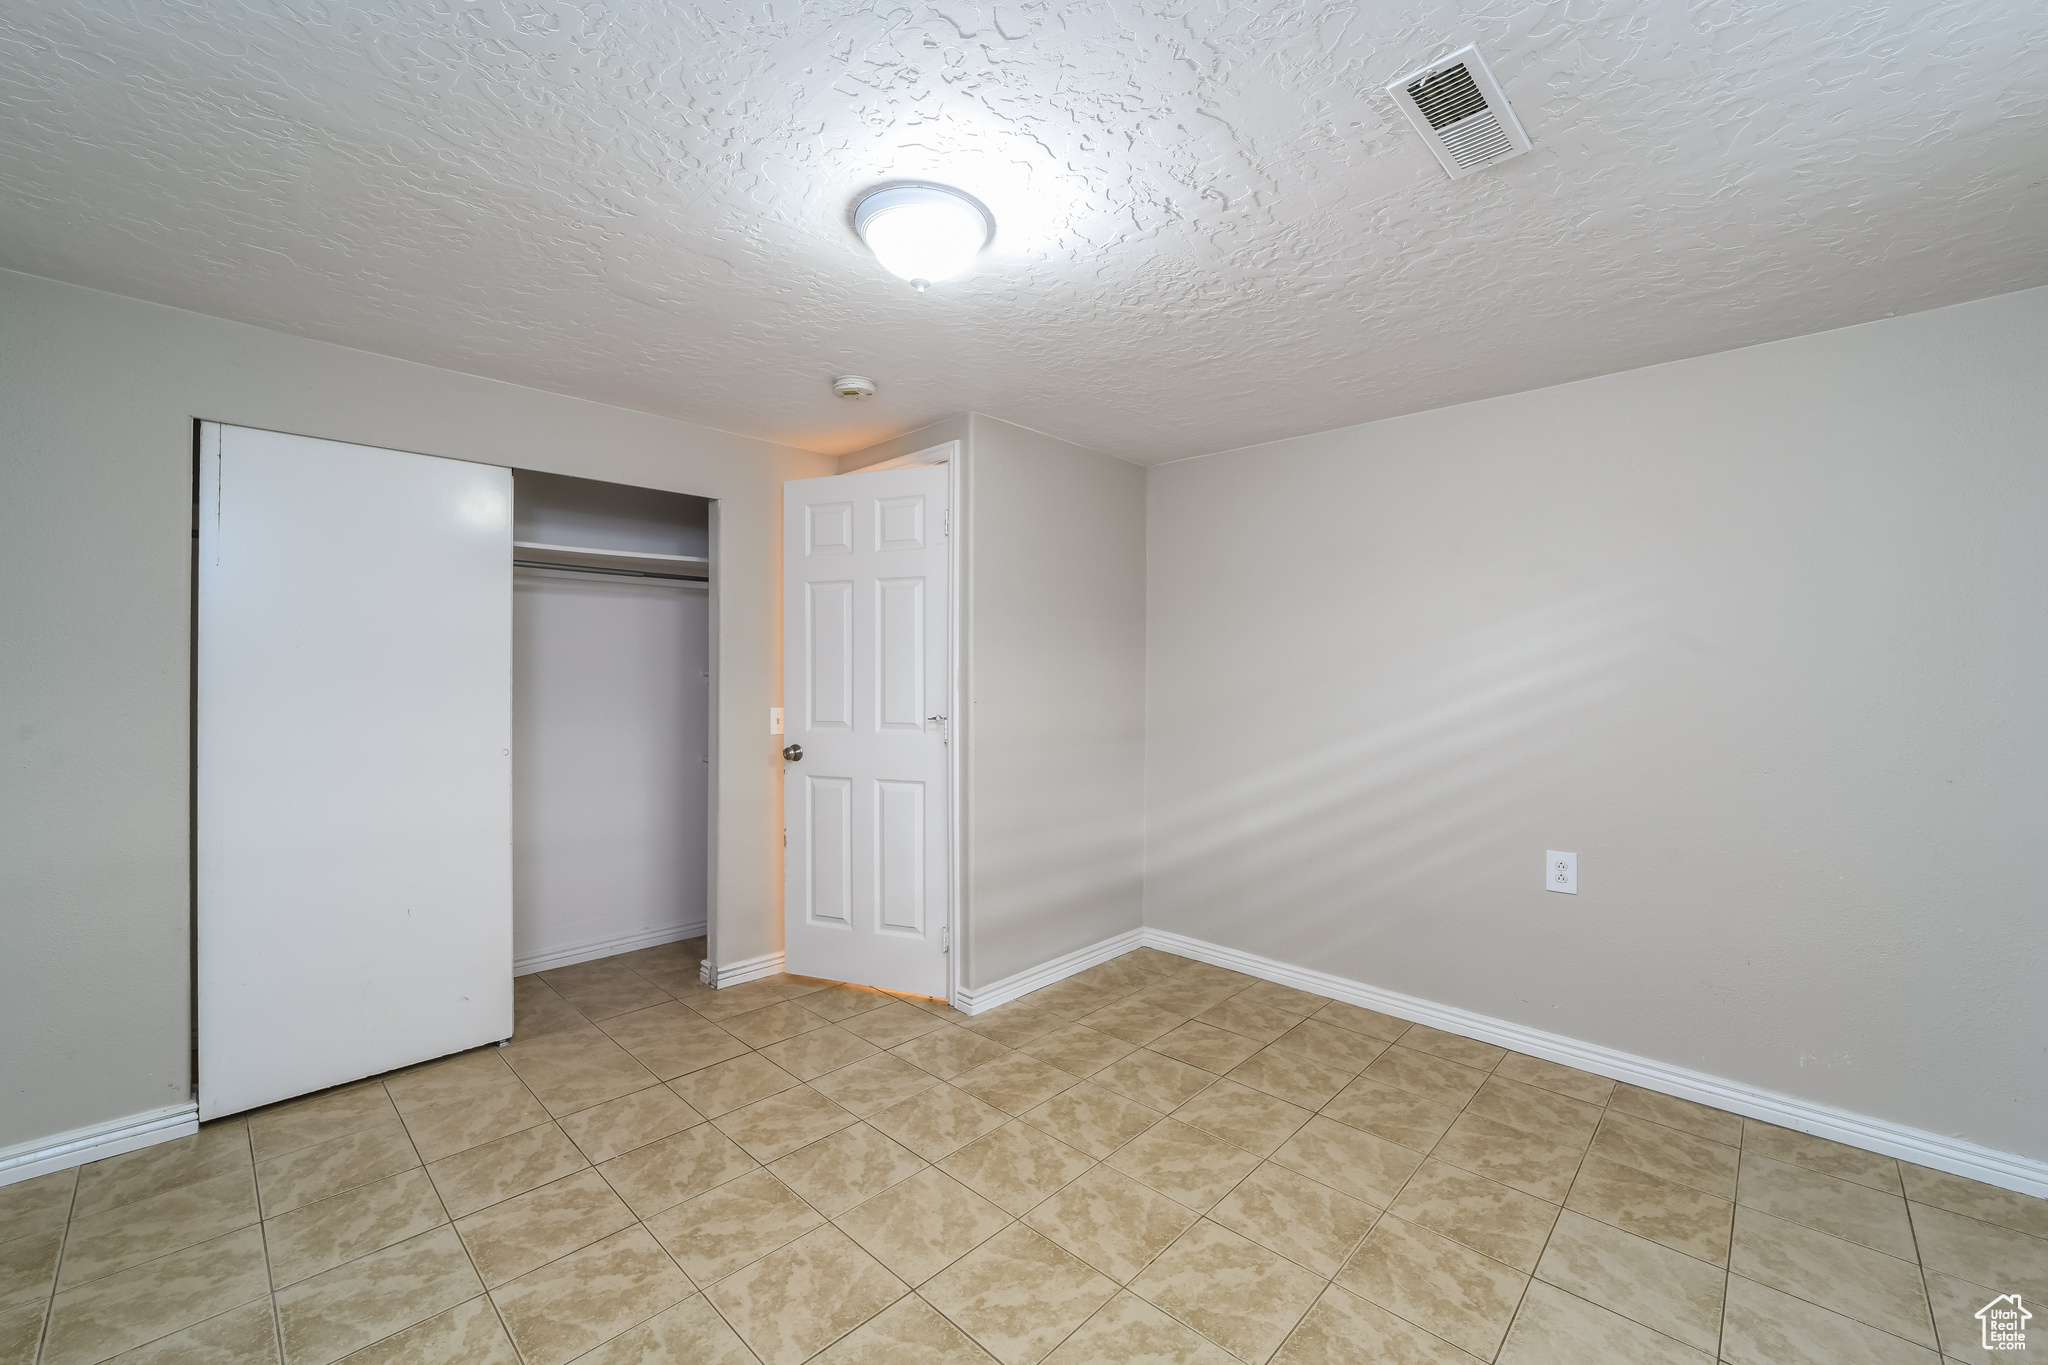 Unfurnished bedroom featuring a closet, light tile floors, and a textured ceiling